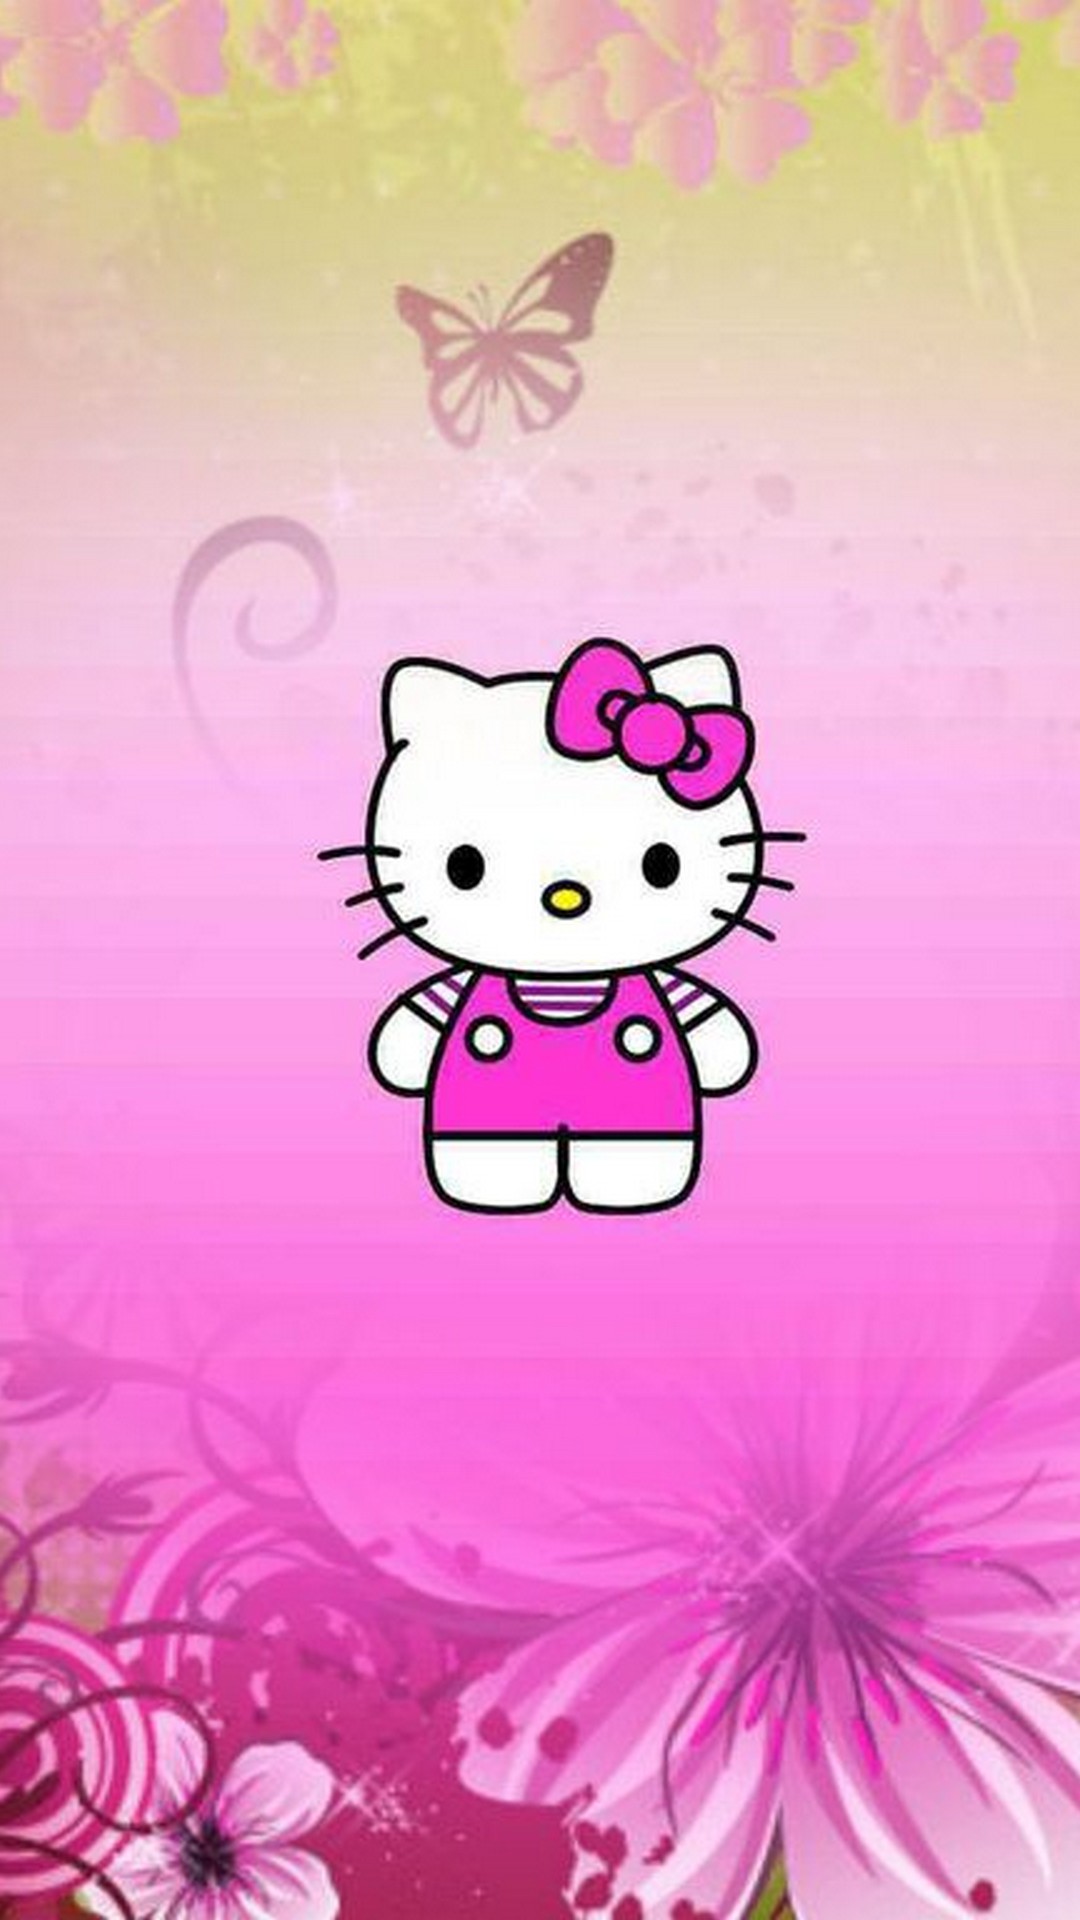 Hello Kitty Wallpaper Android with image resolution 1080x1920 pixel. You can make this wallpaper for your Android backgrounds, Tablet, Smartphones Screensavers and Mobile Phone Lock Screen